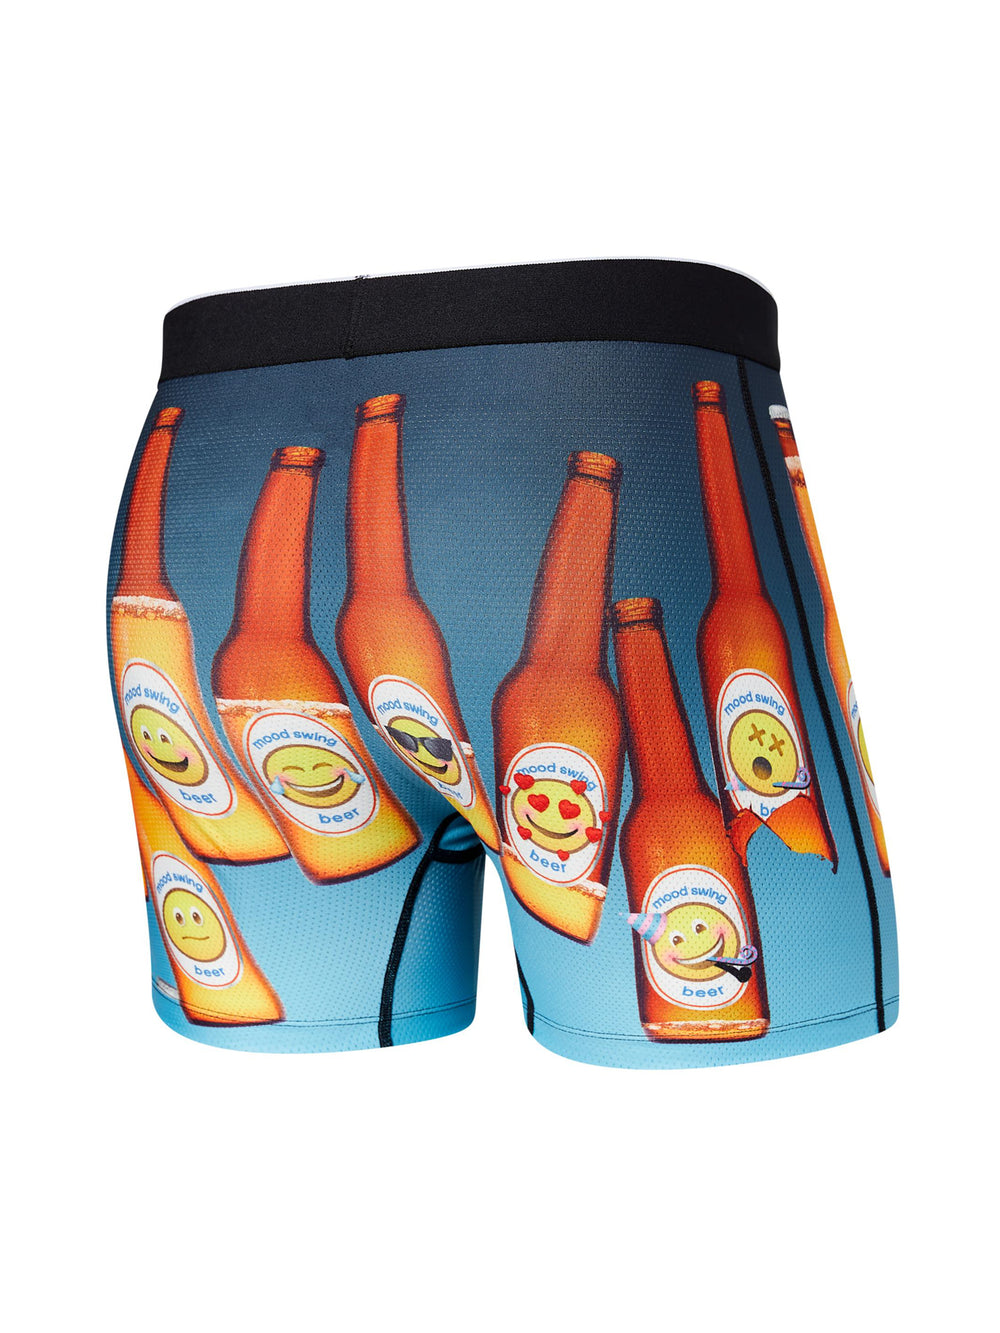 Boathouse SAXX VOLT BOXER BRIEF - FLAME SKULL CLEARANCE